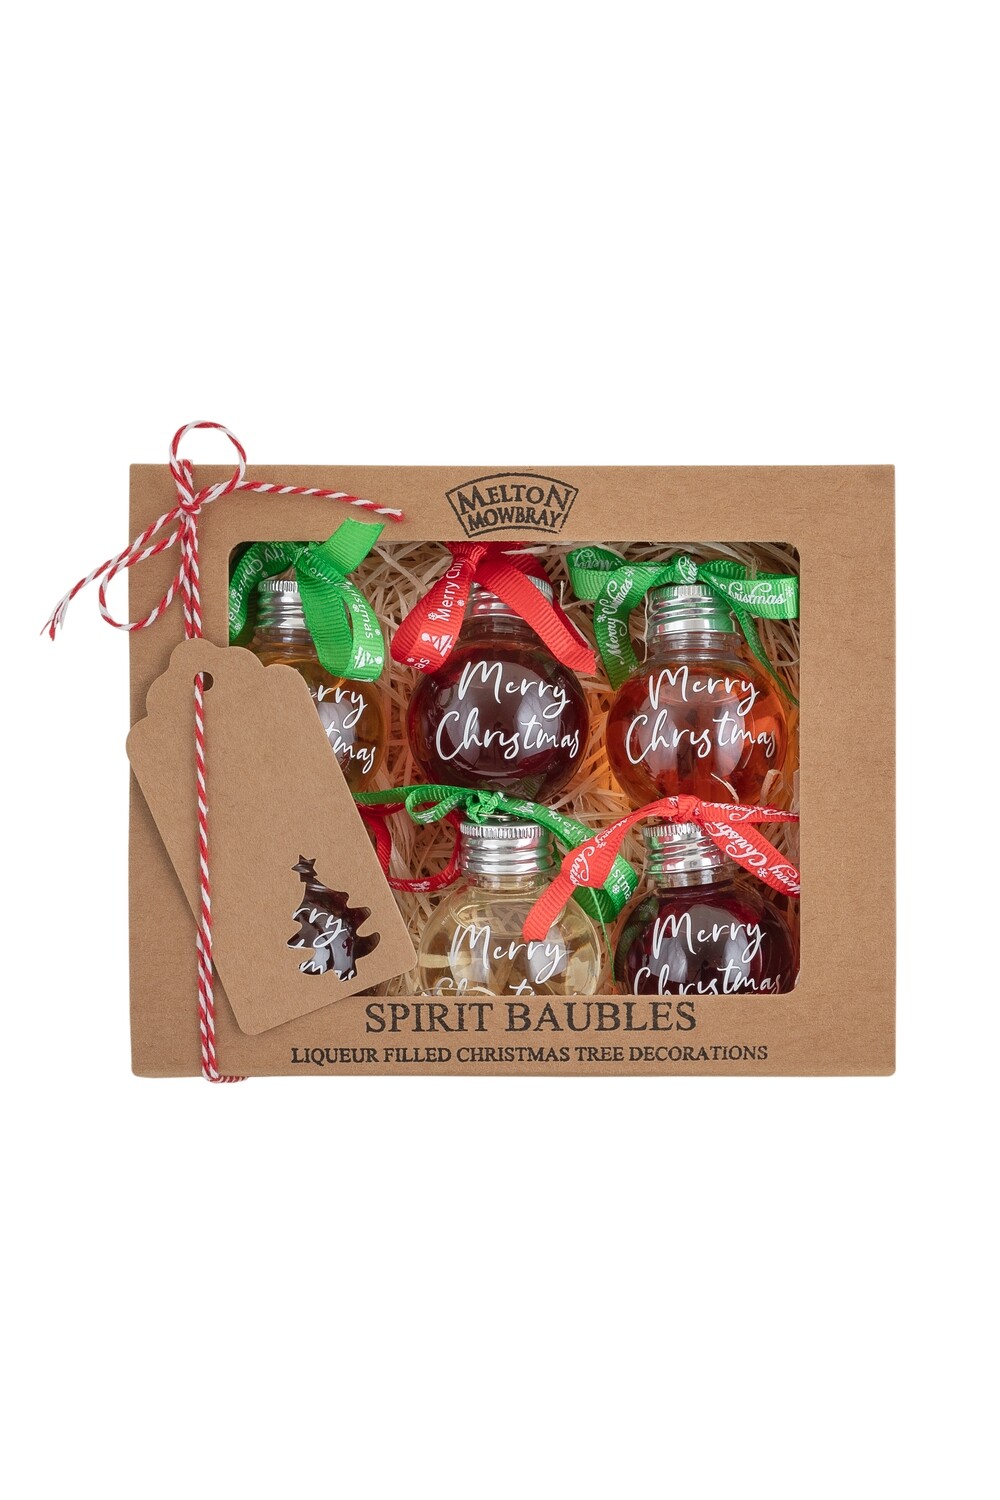 Bauble Selection Box